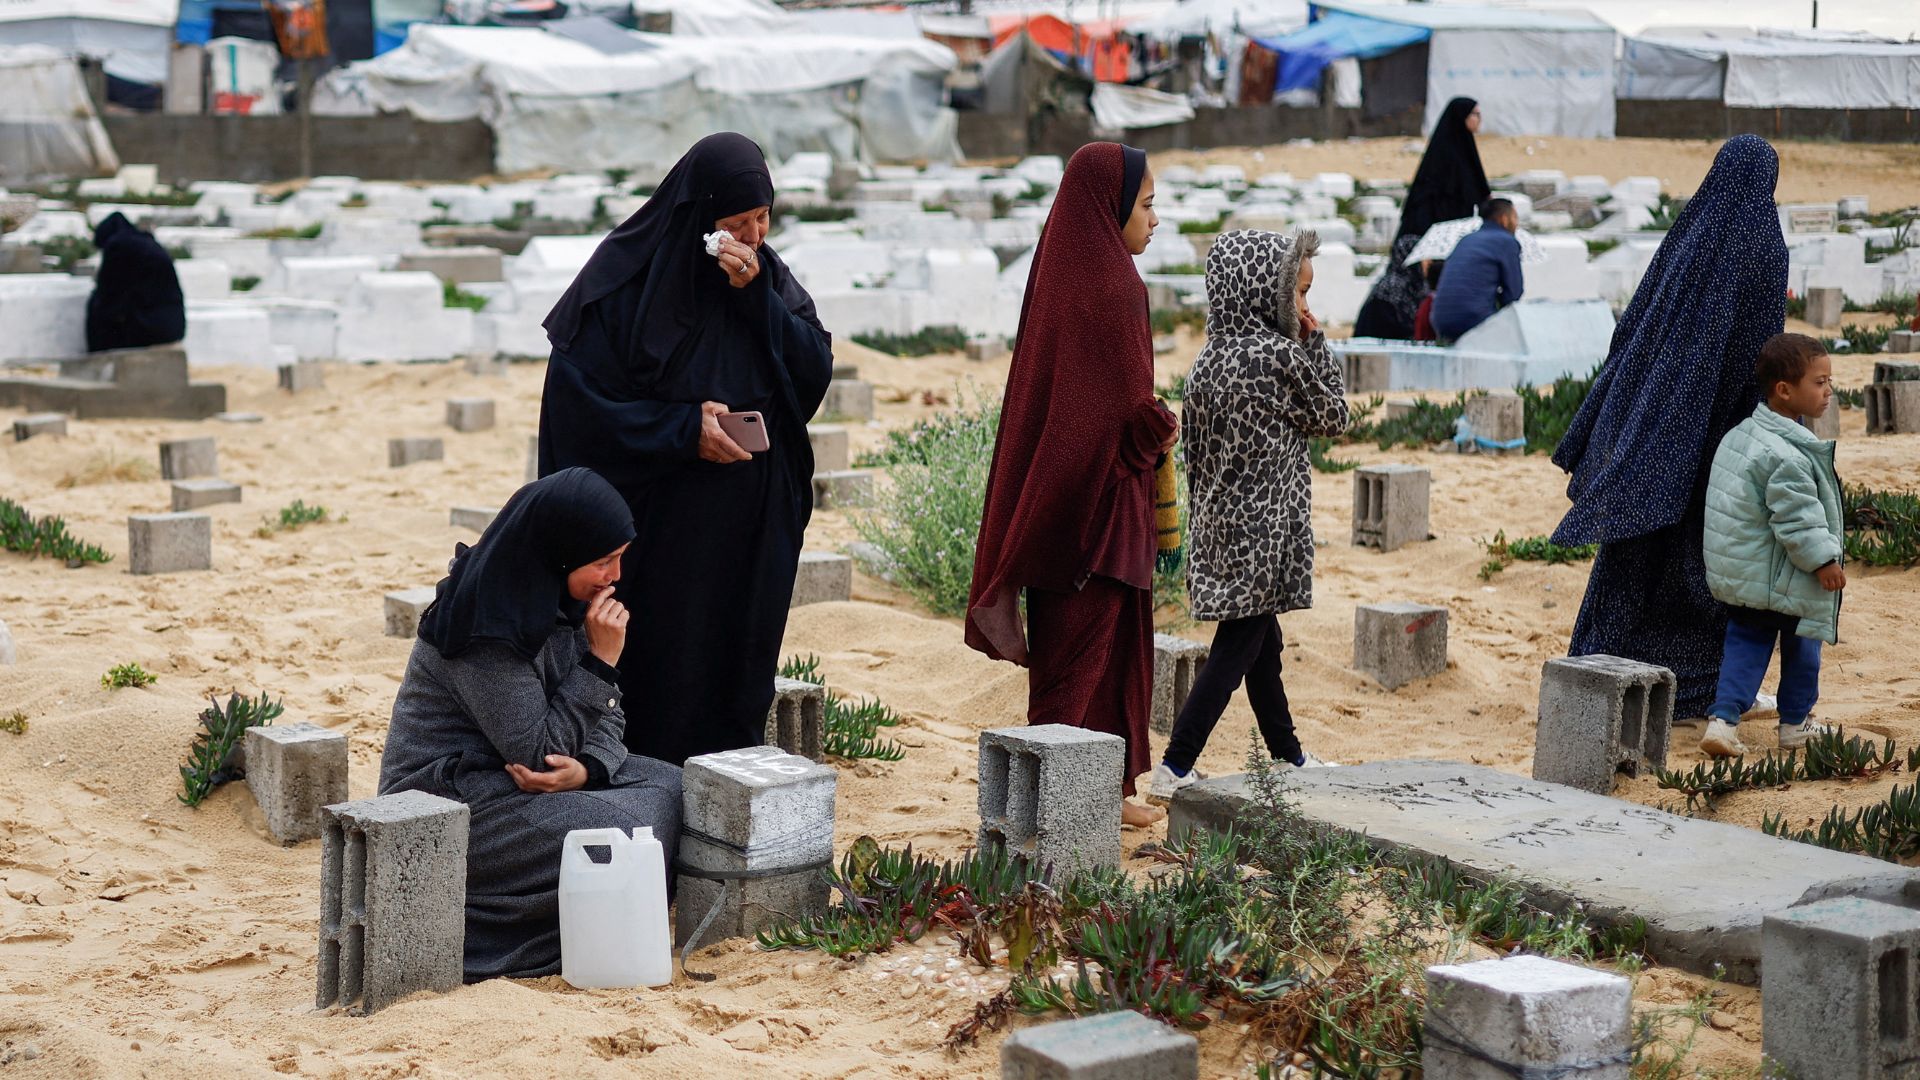 Palestinian women visit graves of people who were killed, in Rafah. /Mohammed Salem/Reuters